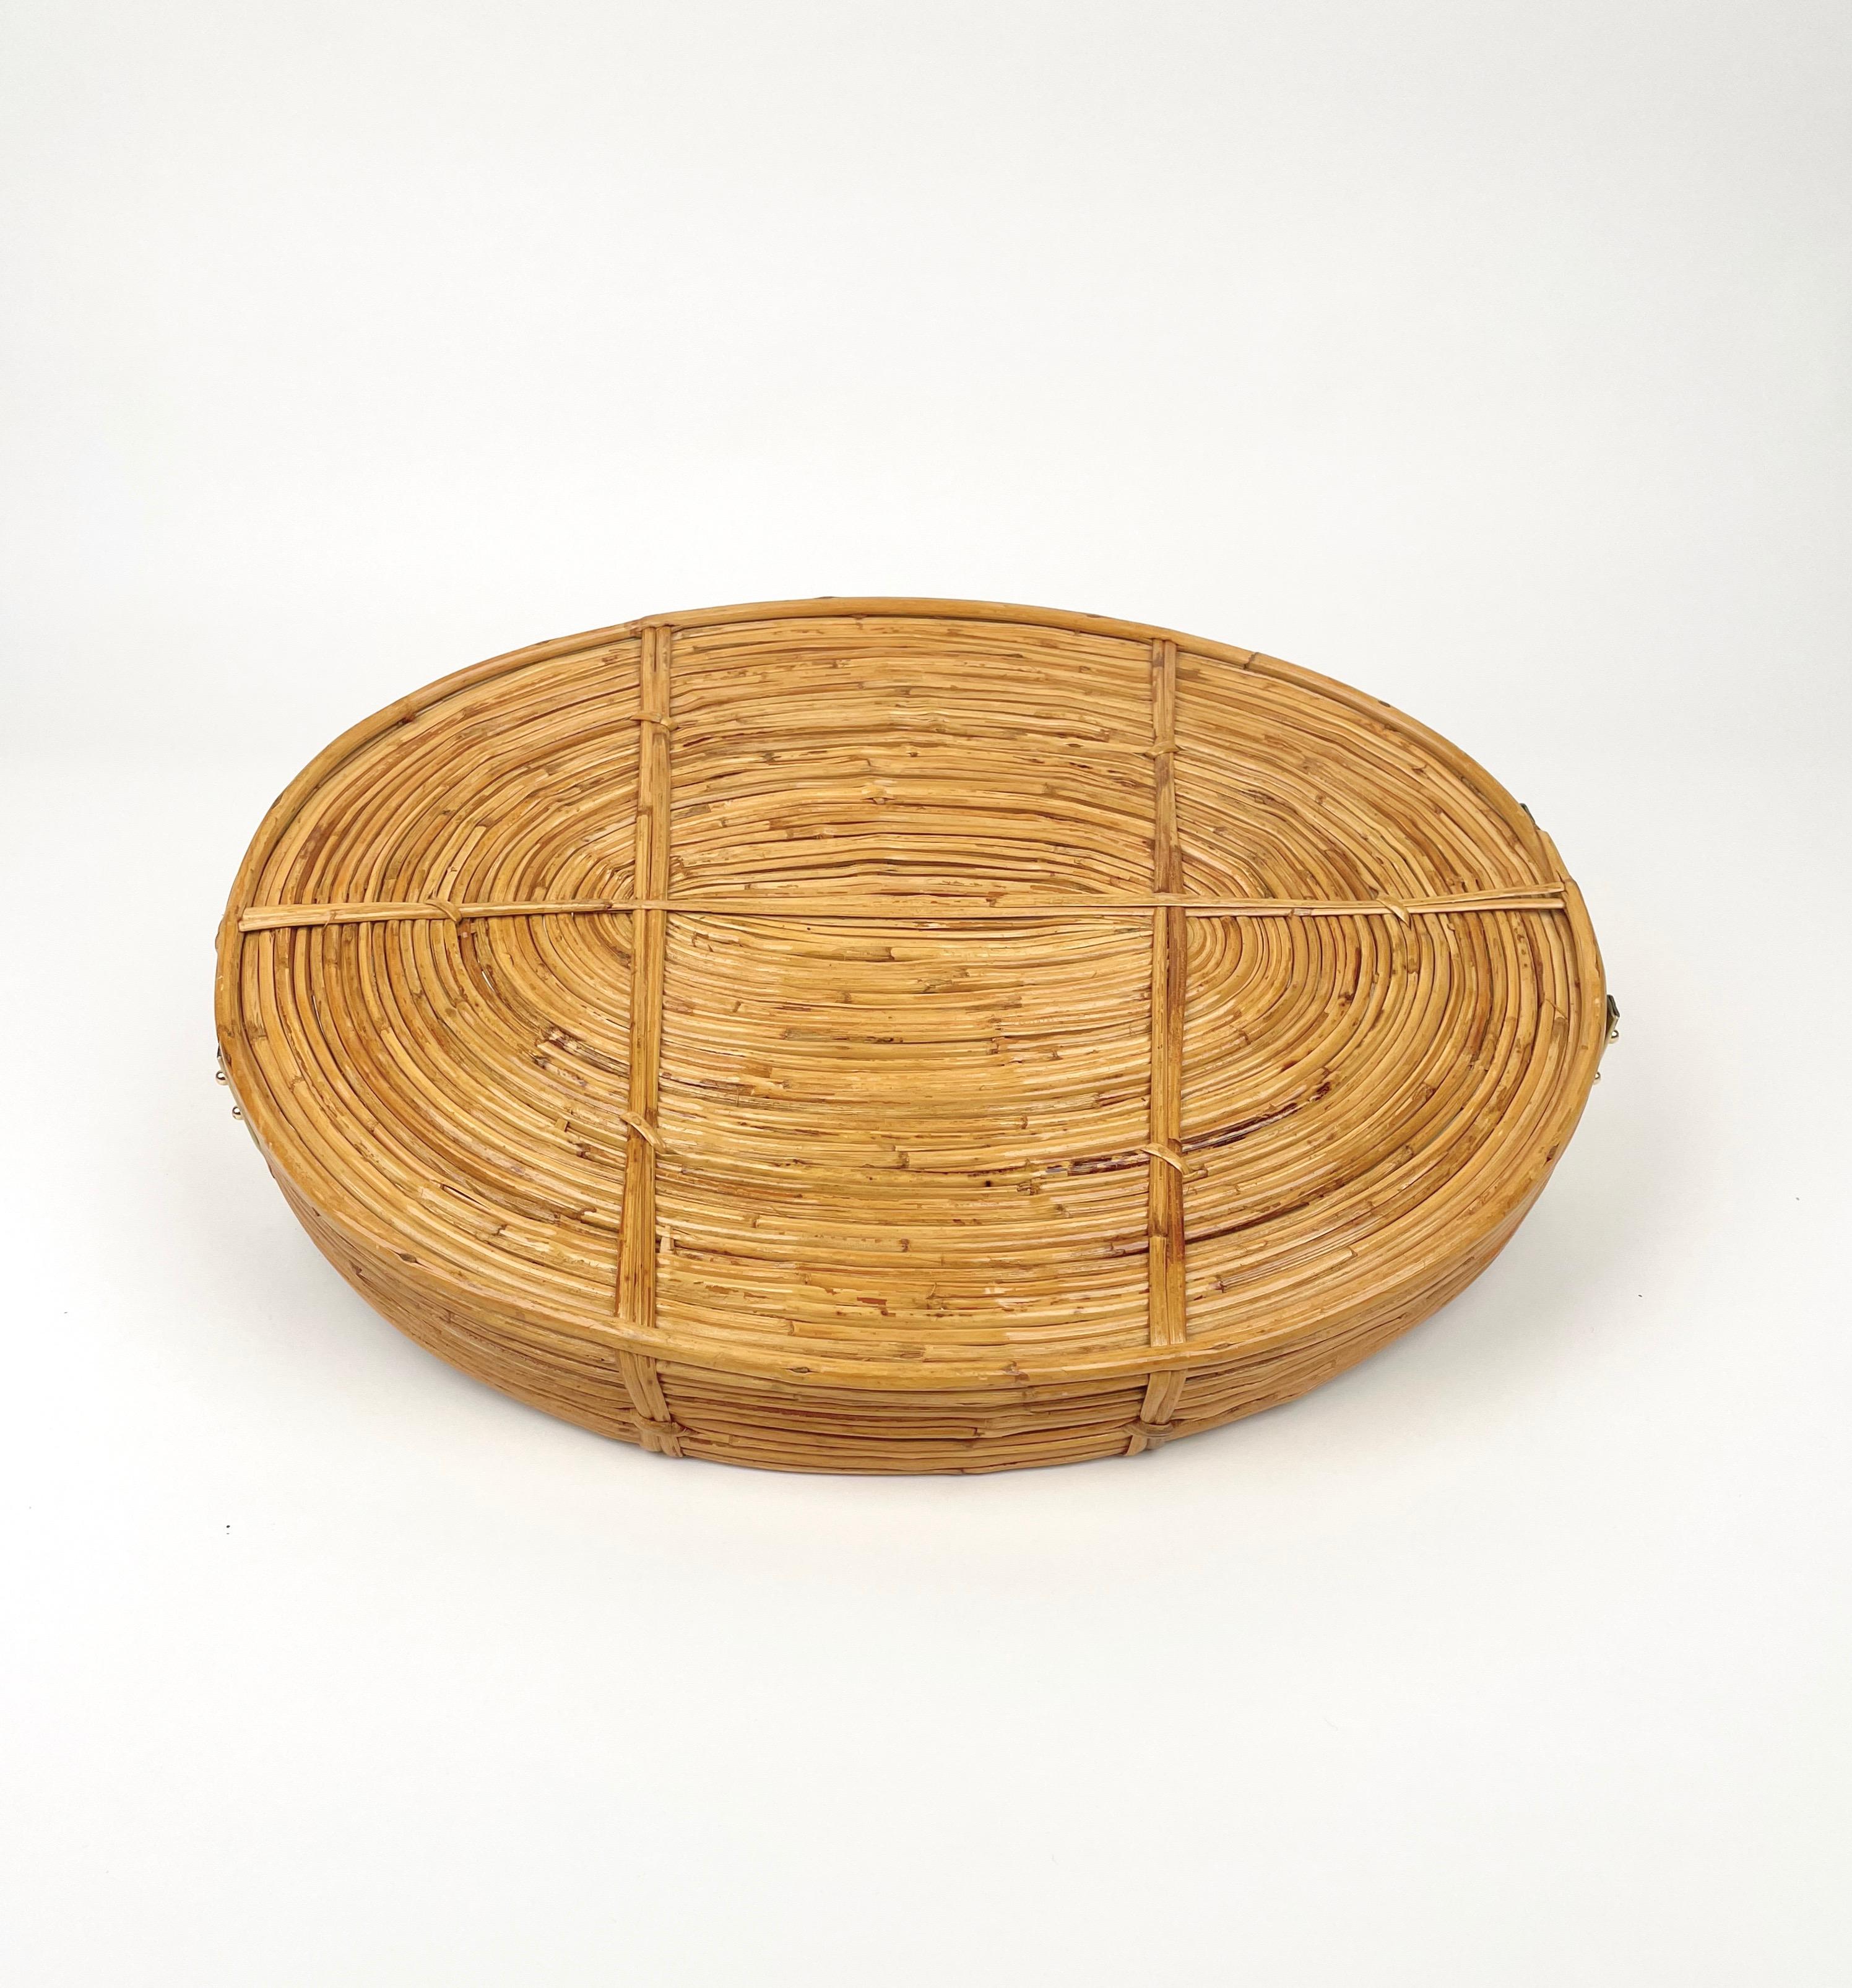 Oval Serving Tray Bamboo, Rattan & Brass, Italy 1970s For Sale 1